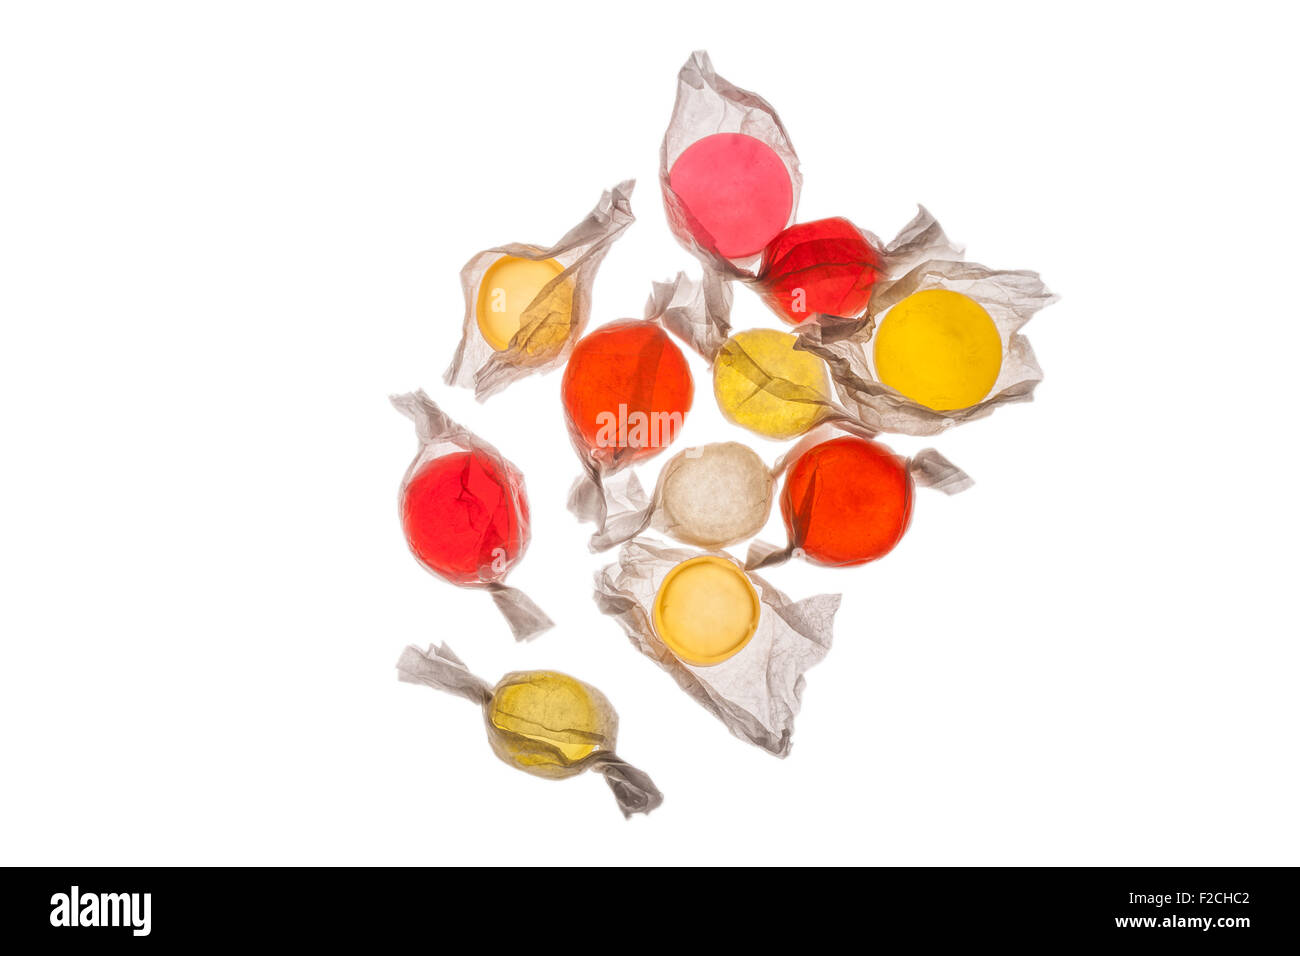 overhead view of orange, yellow, red, pink candy in wrappers on light table Stock Photo